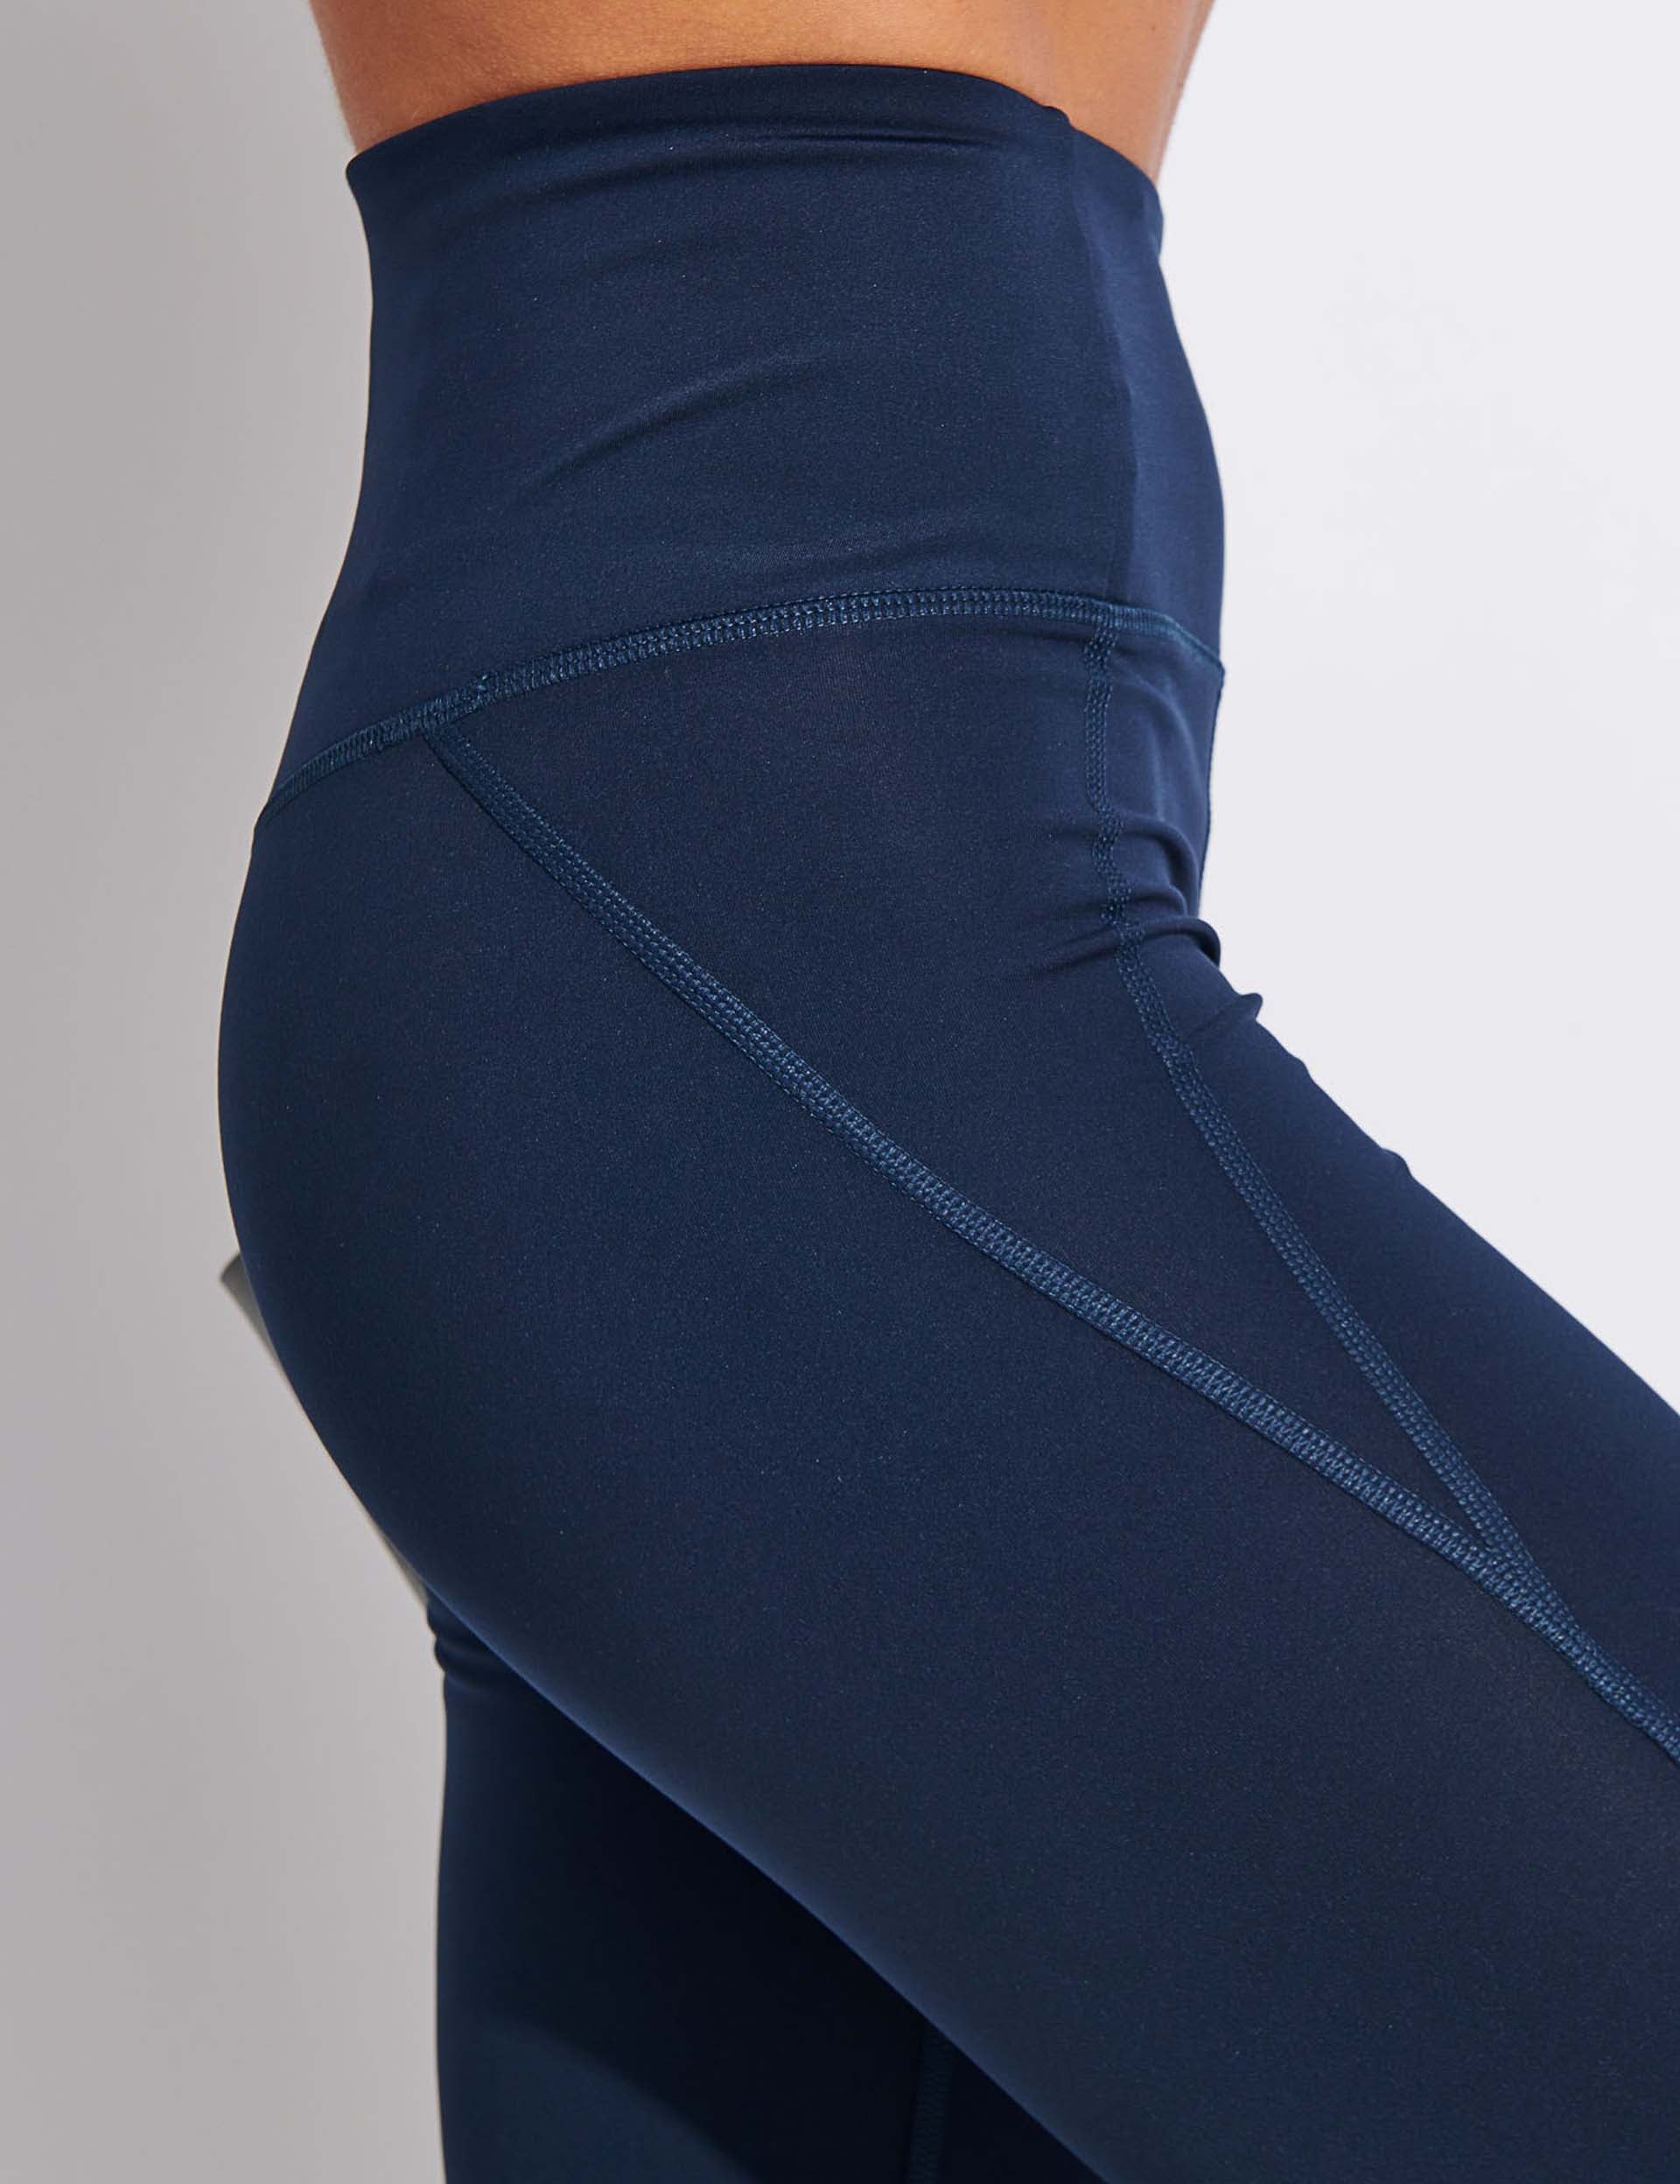 LULULEMON - Navy 3/4 tights! 10, Recycle Style